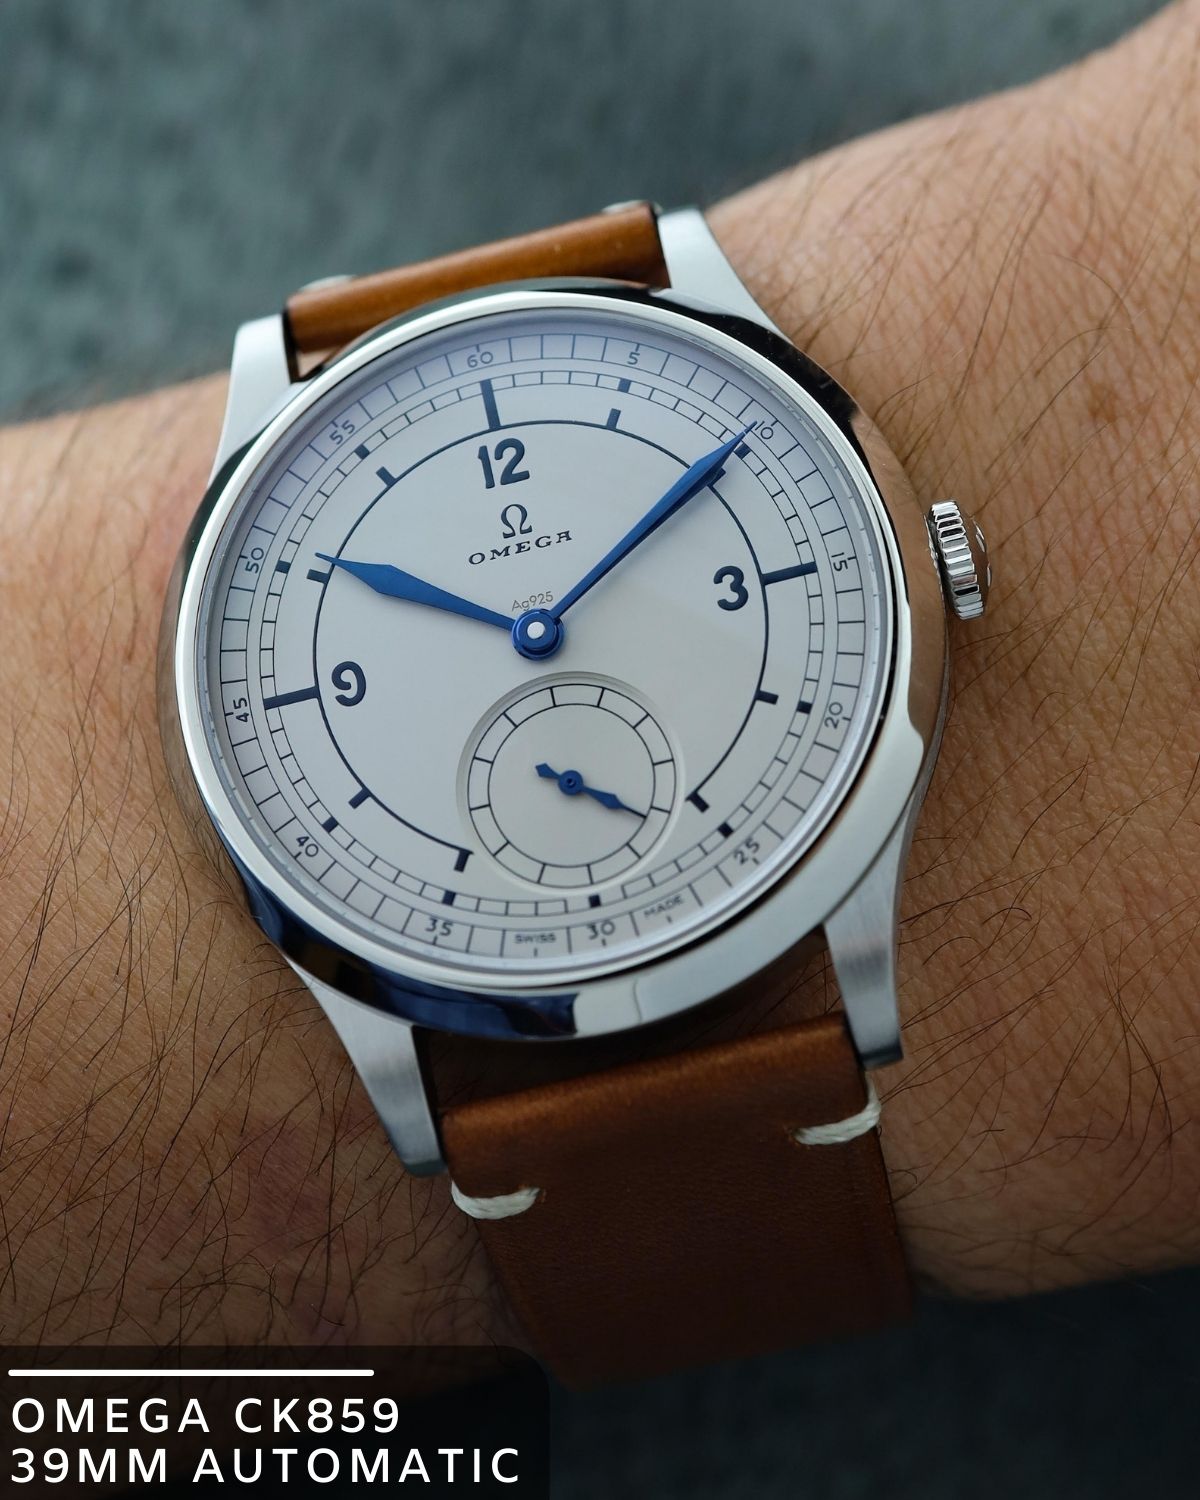 Faces of Distinction: Watch Dial Materials